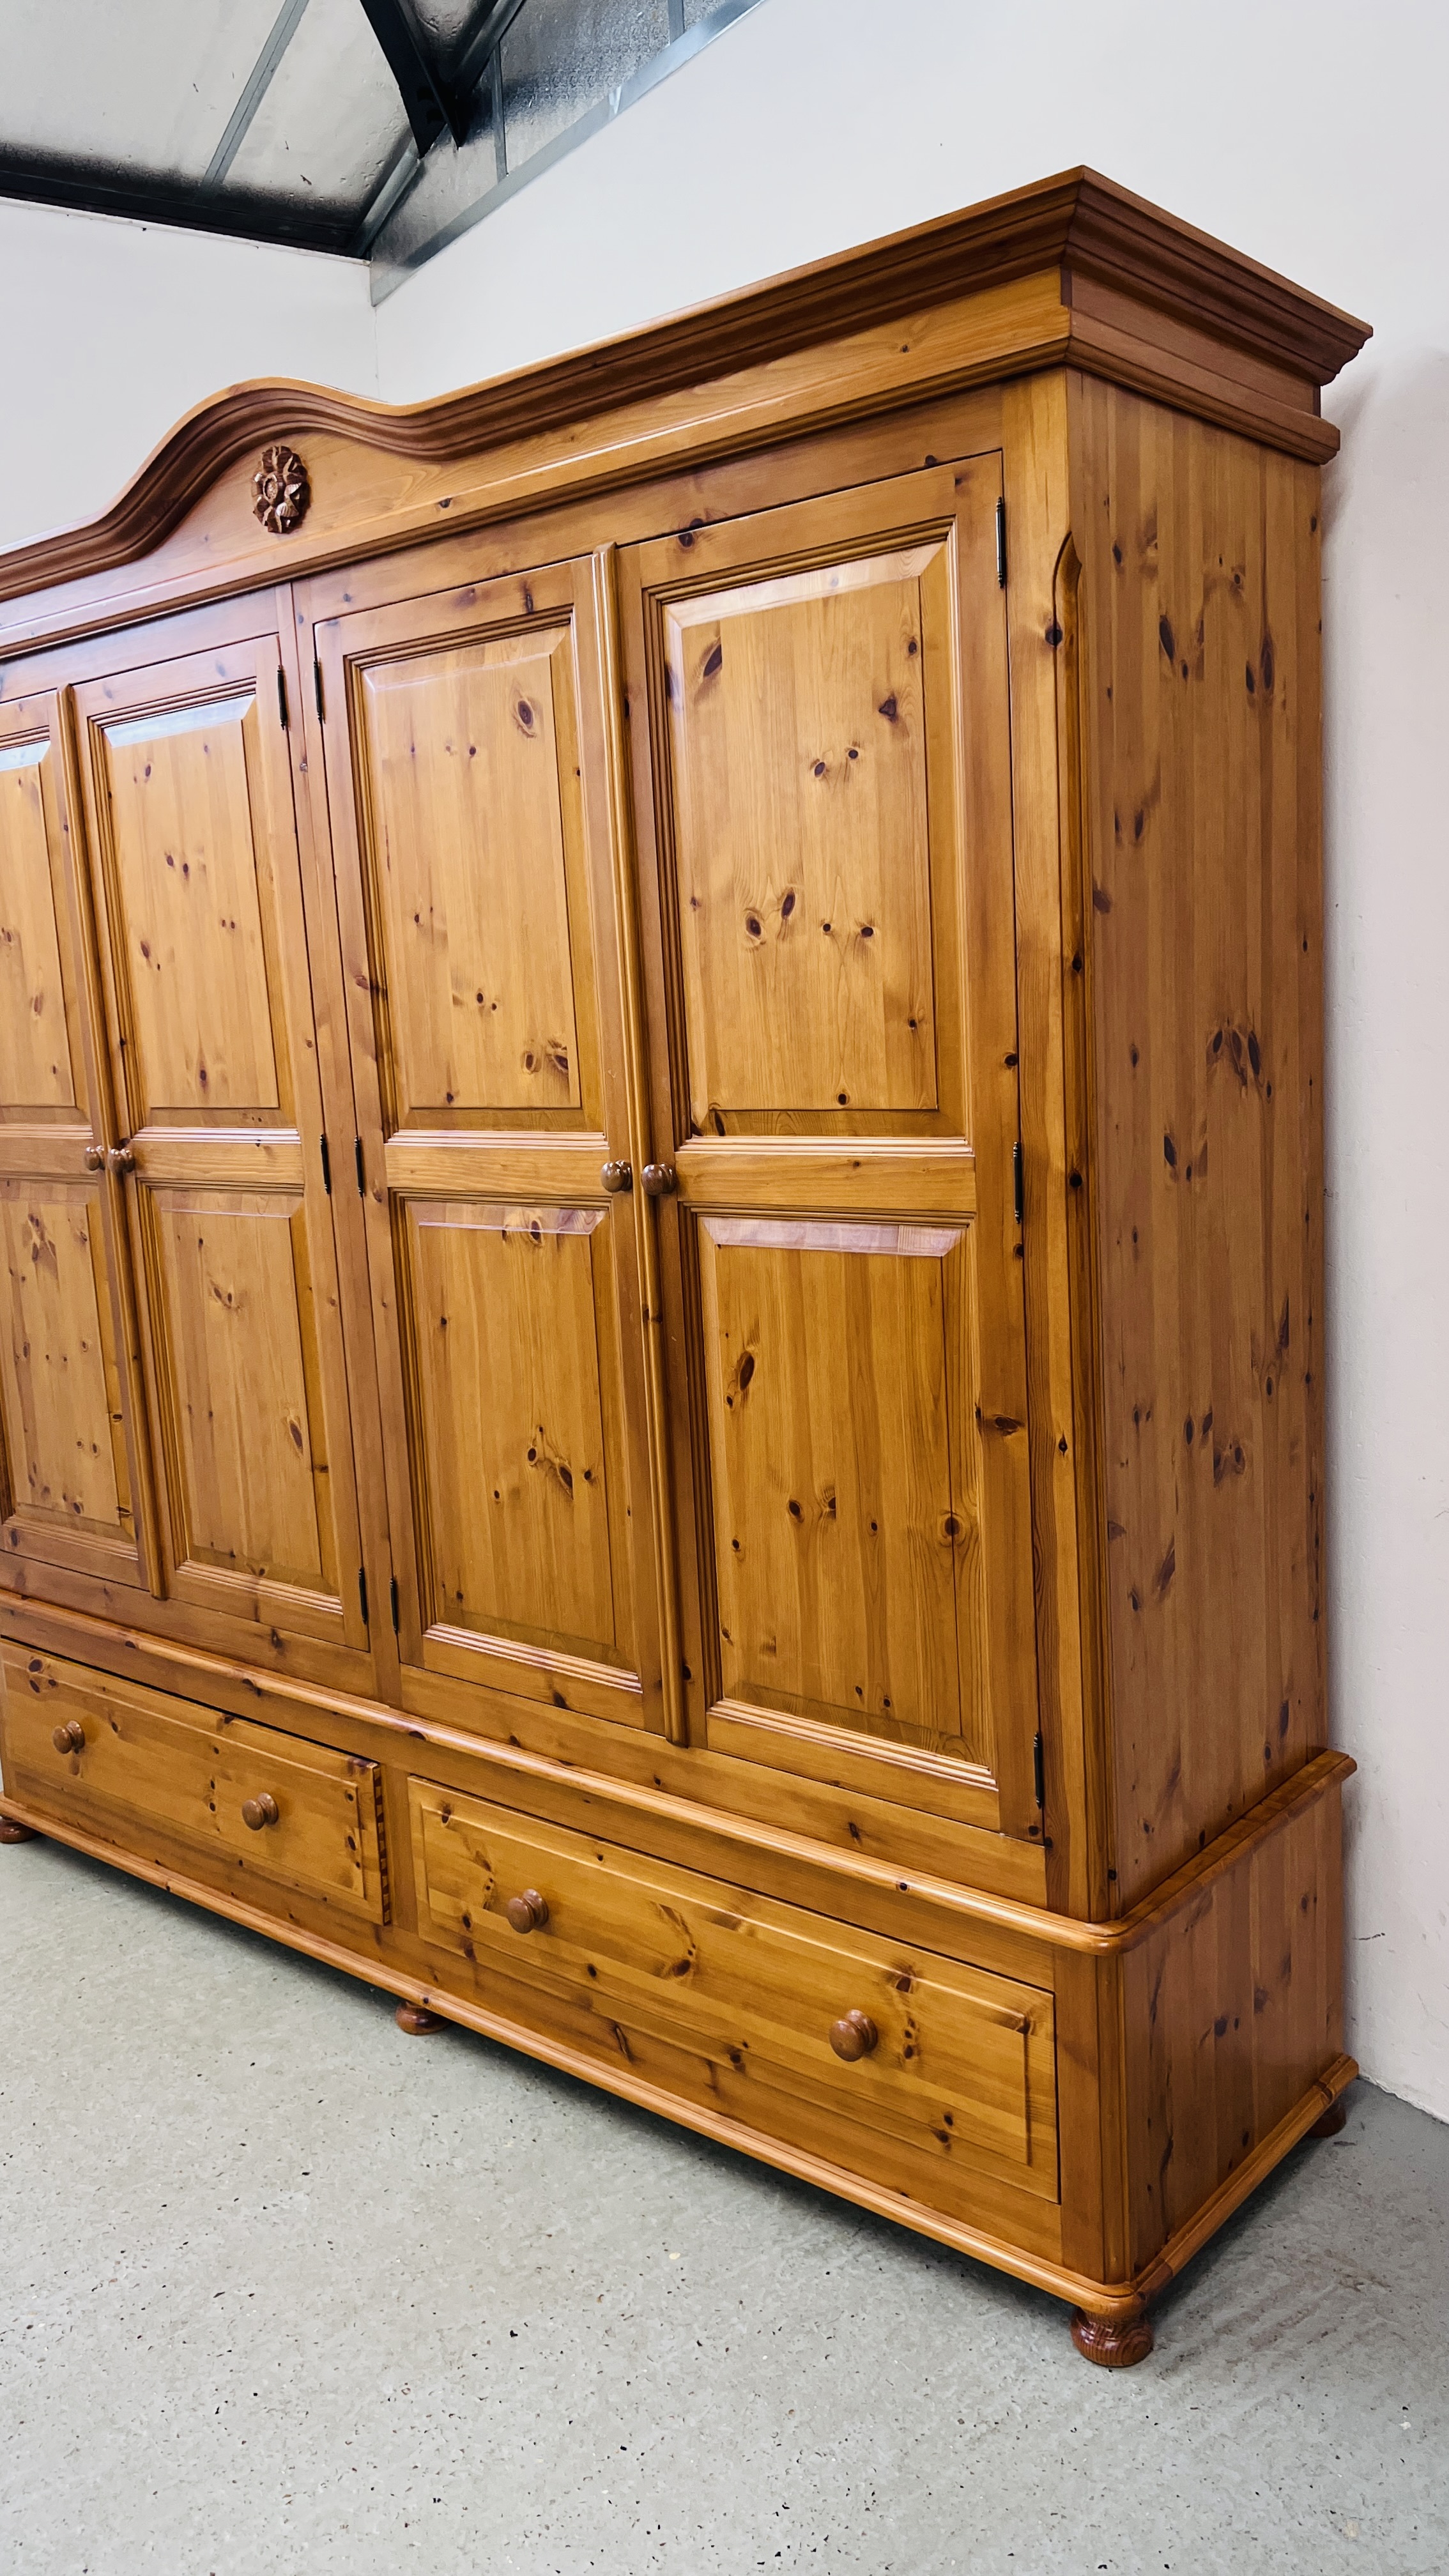 A GOOD QUALITY HONEY PINE FOUR DOOR WARDROBE WITH TWO DRAWER BASE WIDTH 228CM. DEPTH 59CM. - Image 2 of 14